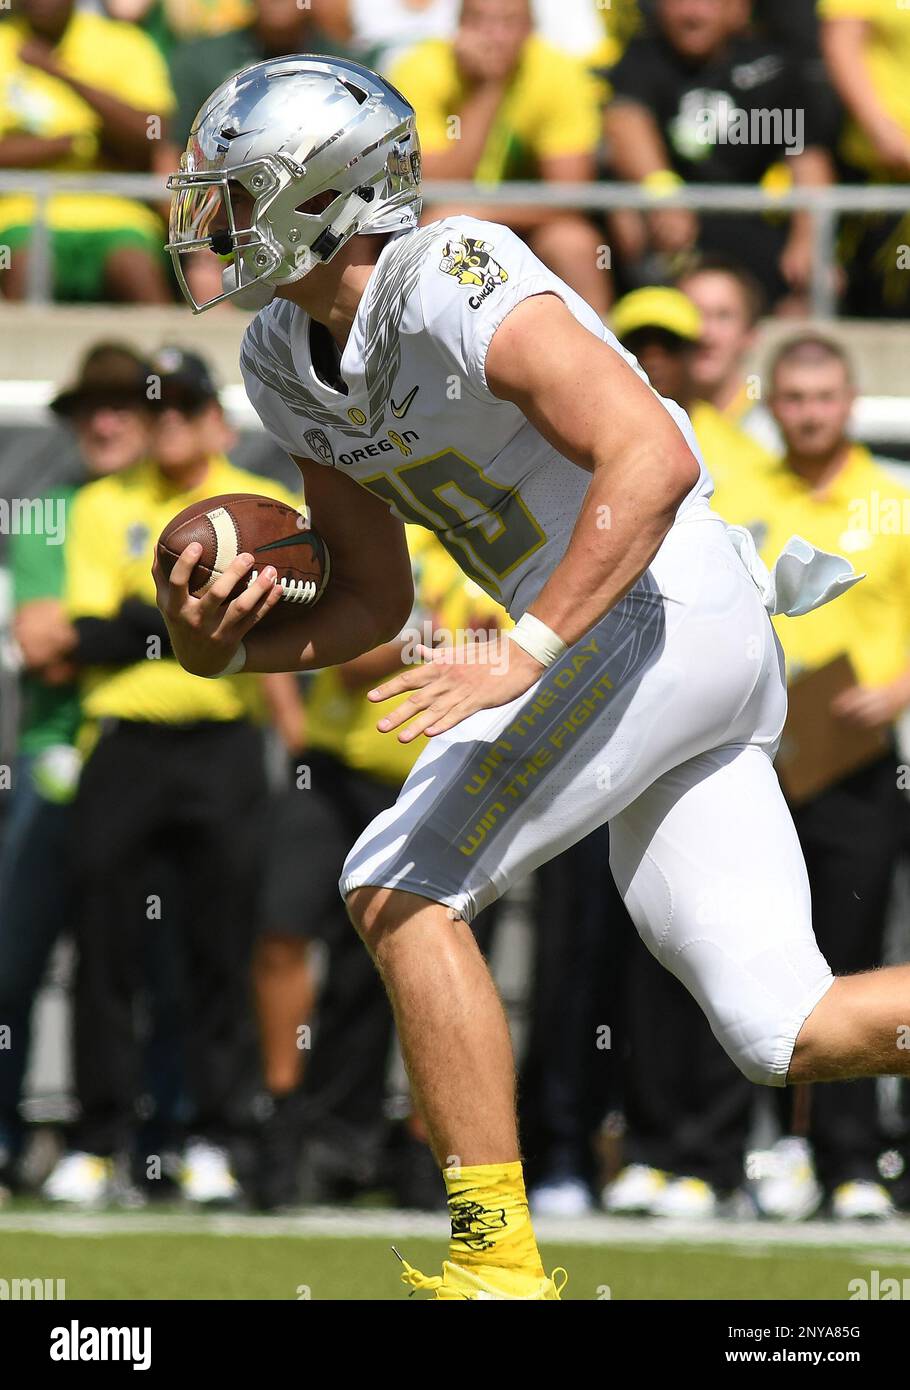 4 cool things about Oregon's 2017 'Stomp Out Cancer' alternate